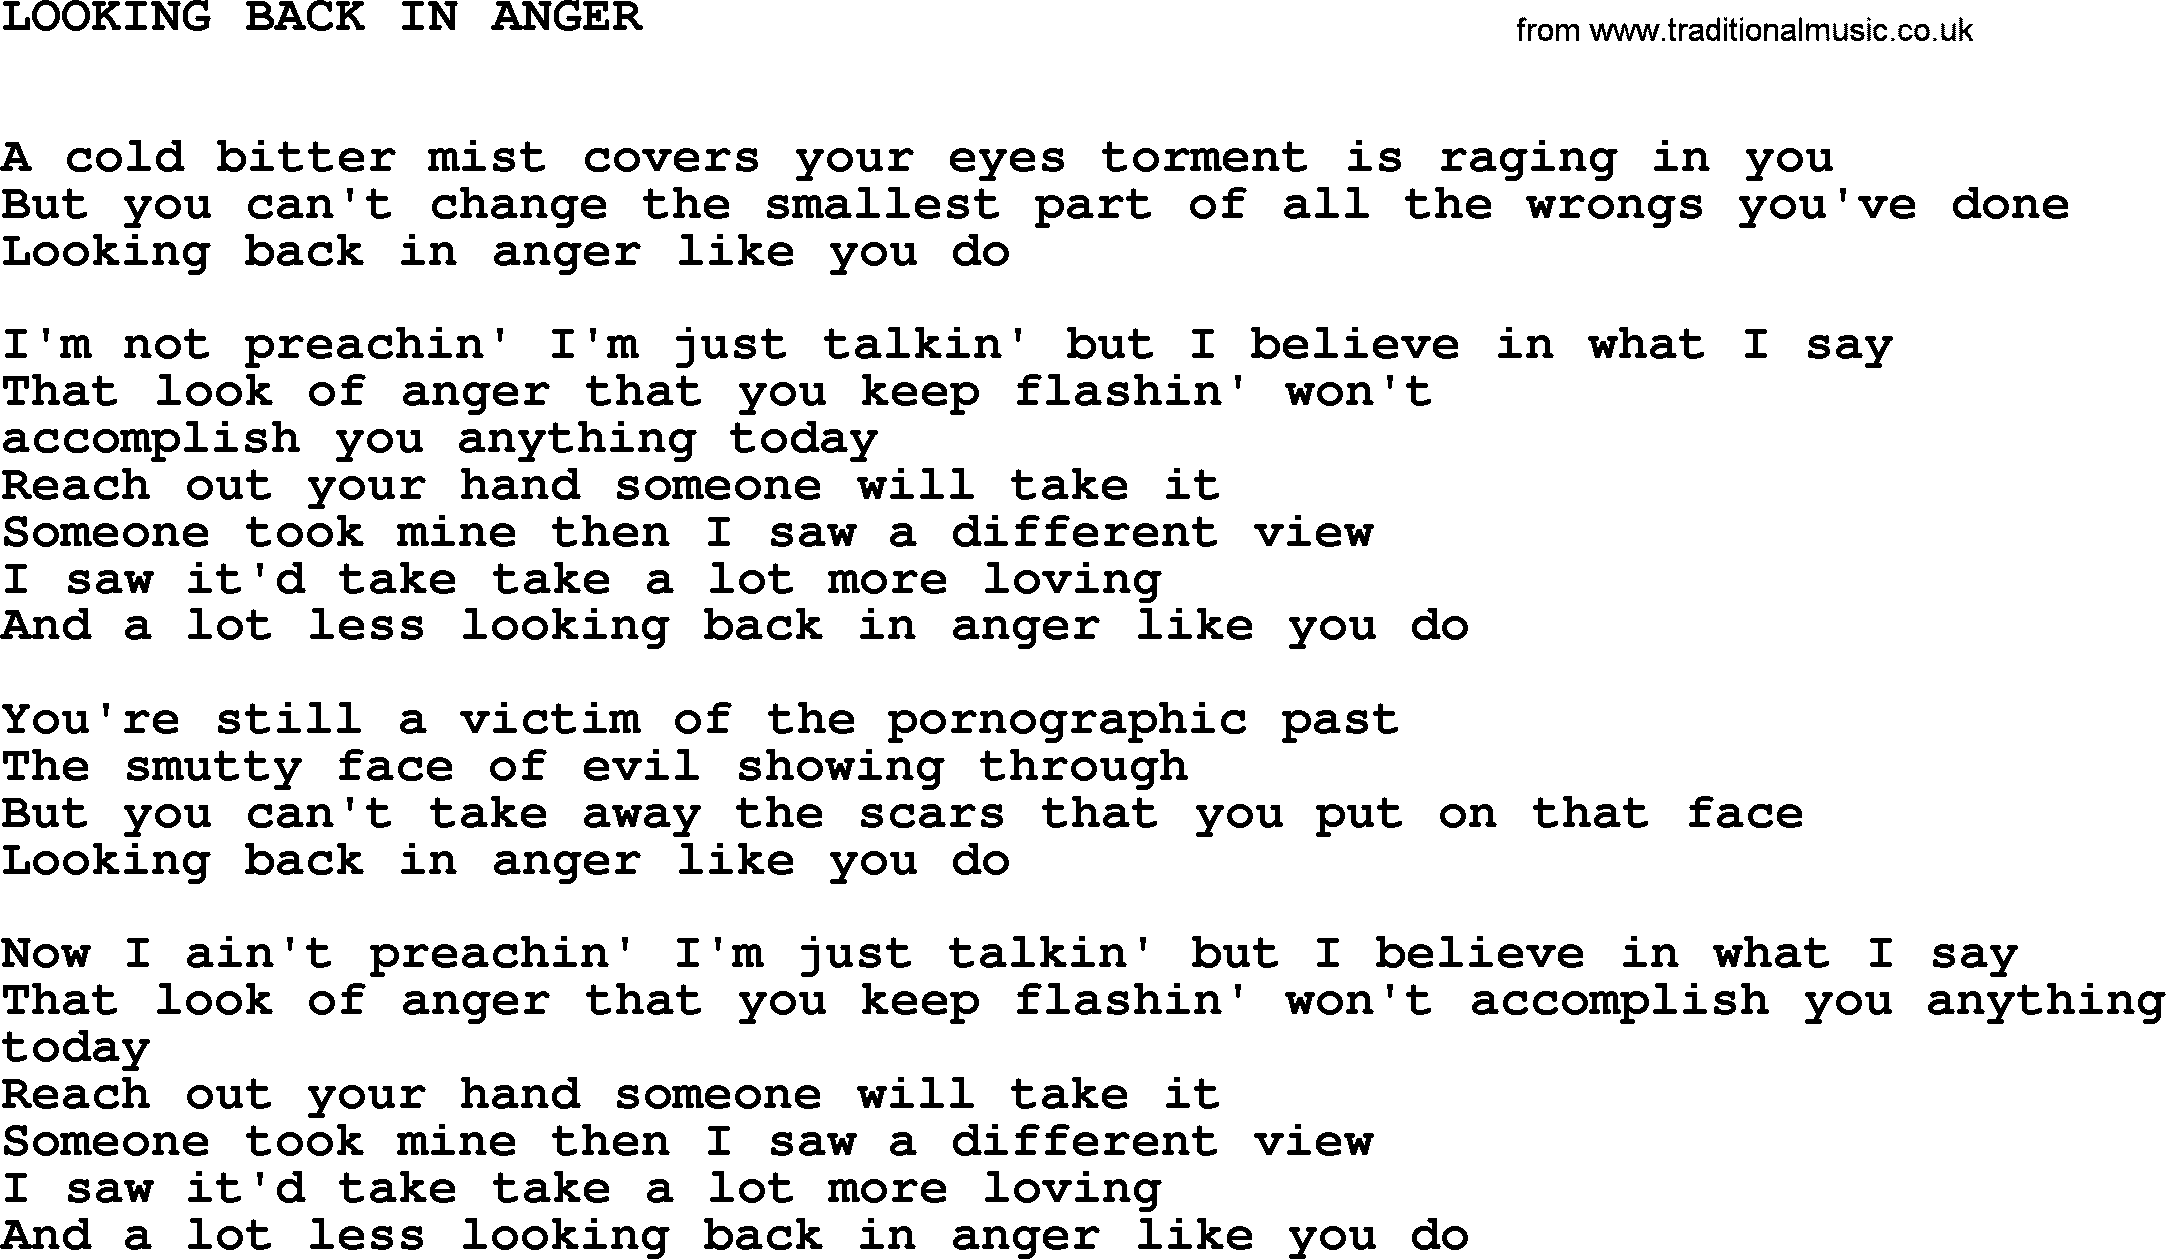 Johnny Cash song Looking Back In Anger.txt lyrics